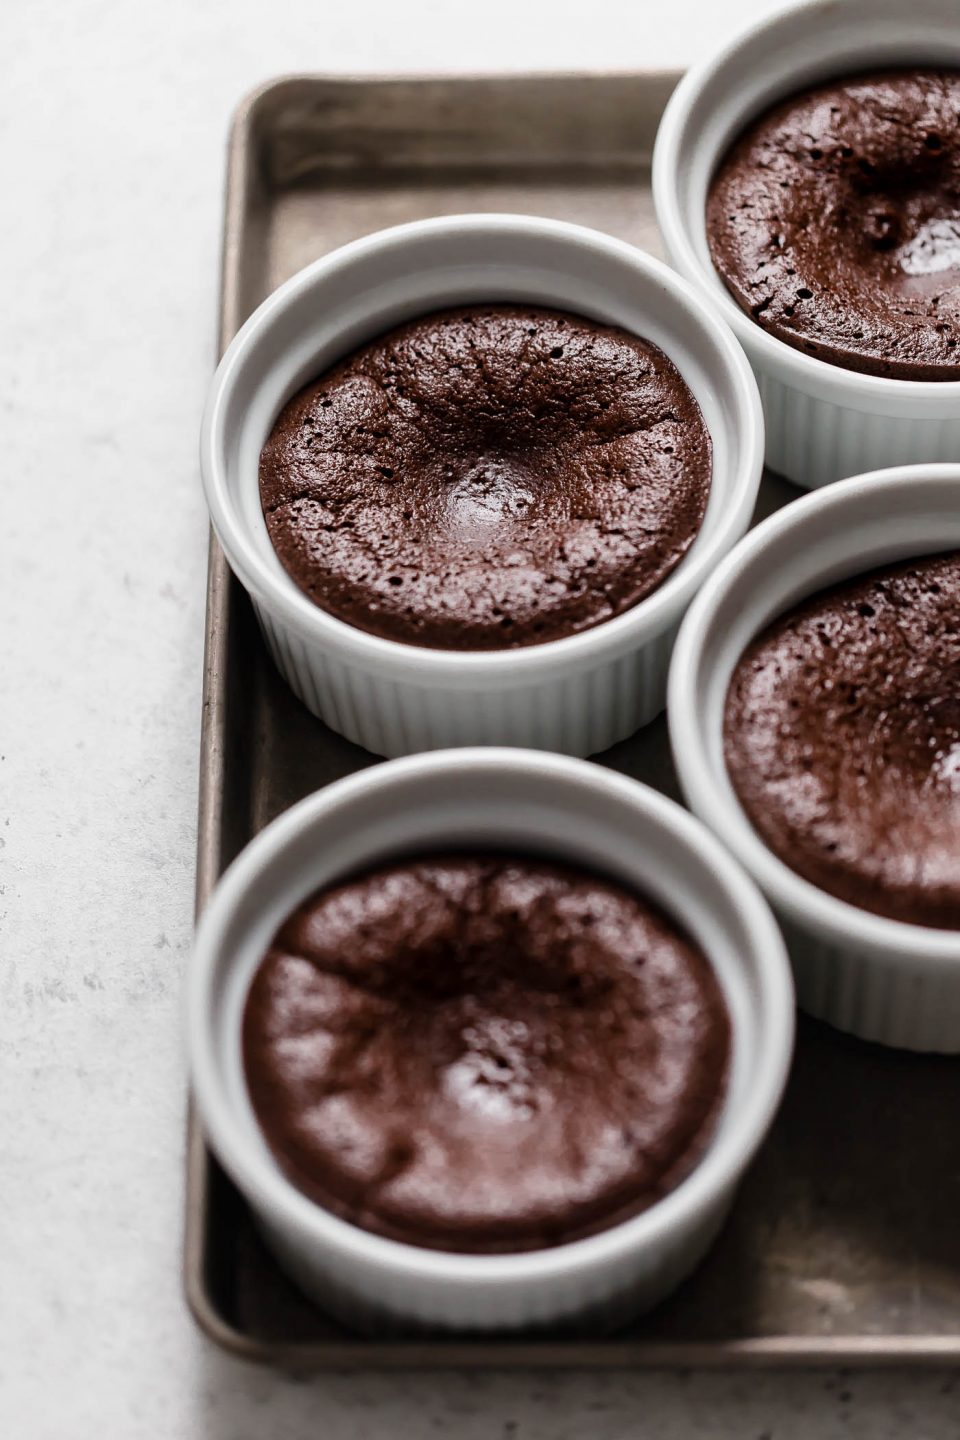 the easiest mini flourless chocolate cake recipe, made with 5 ingredients. these individual flourless chocolate cakes are amazingly light & fudgy all at once. an impressive & elegant dessert for valentine’s day date nights or galentine’s gatherings! #playswellwithbutter #flourlesschocolatecake #individualflourlesschocolatecake #miniflourlesschocolatecake #easyflourlesschocolatecakerecipe #bestflourlesschocolatecakerecipe #valentinesdaydessert #datenightrecipe #girlsnightrecipe #chocolatedessert